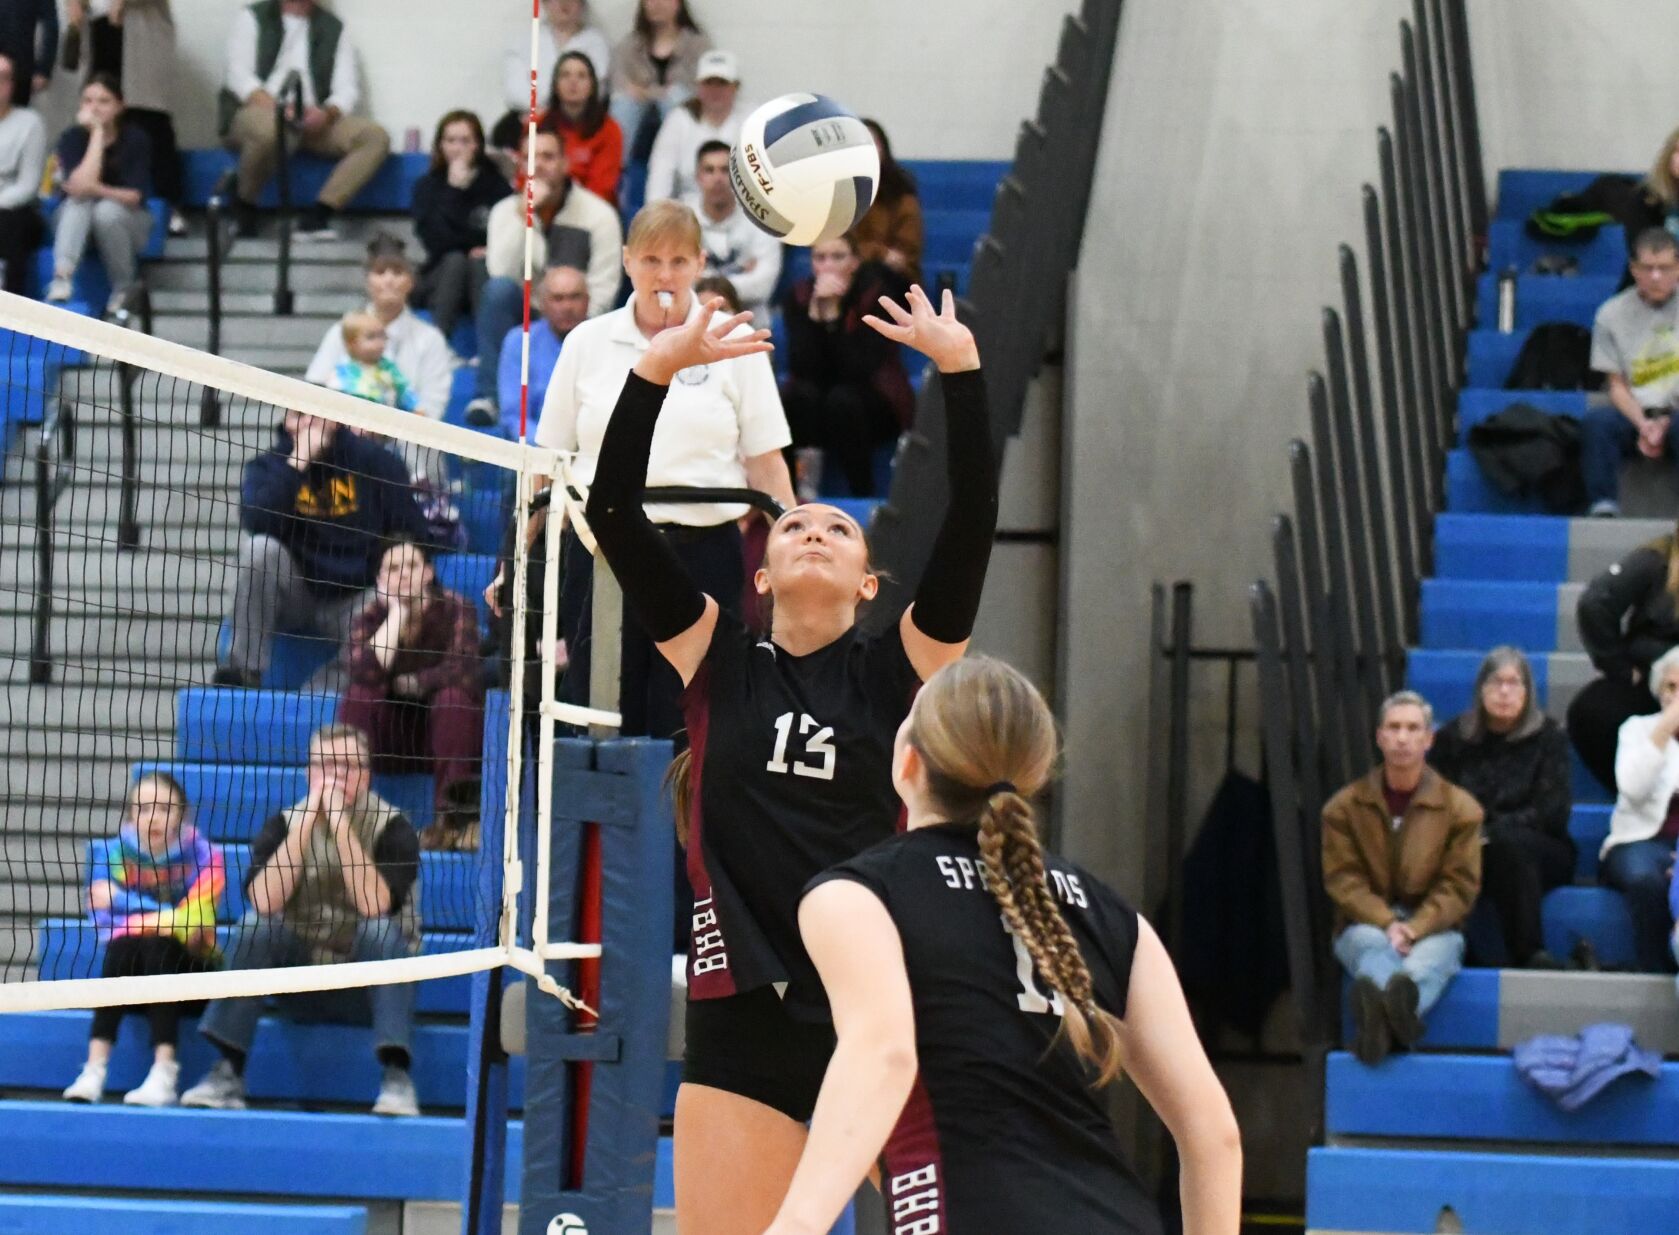 Cassie Vaughan Achieves 1,000th Career Assist Milestone in Section 2 Girls’ Volleyball Championship